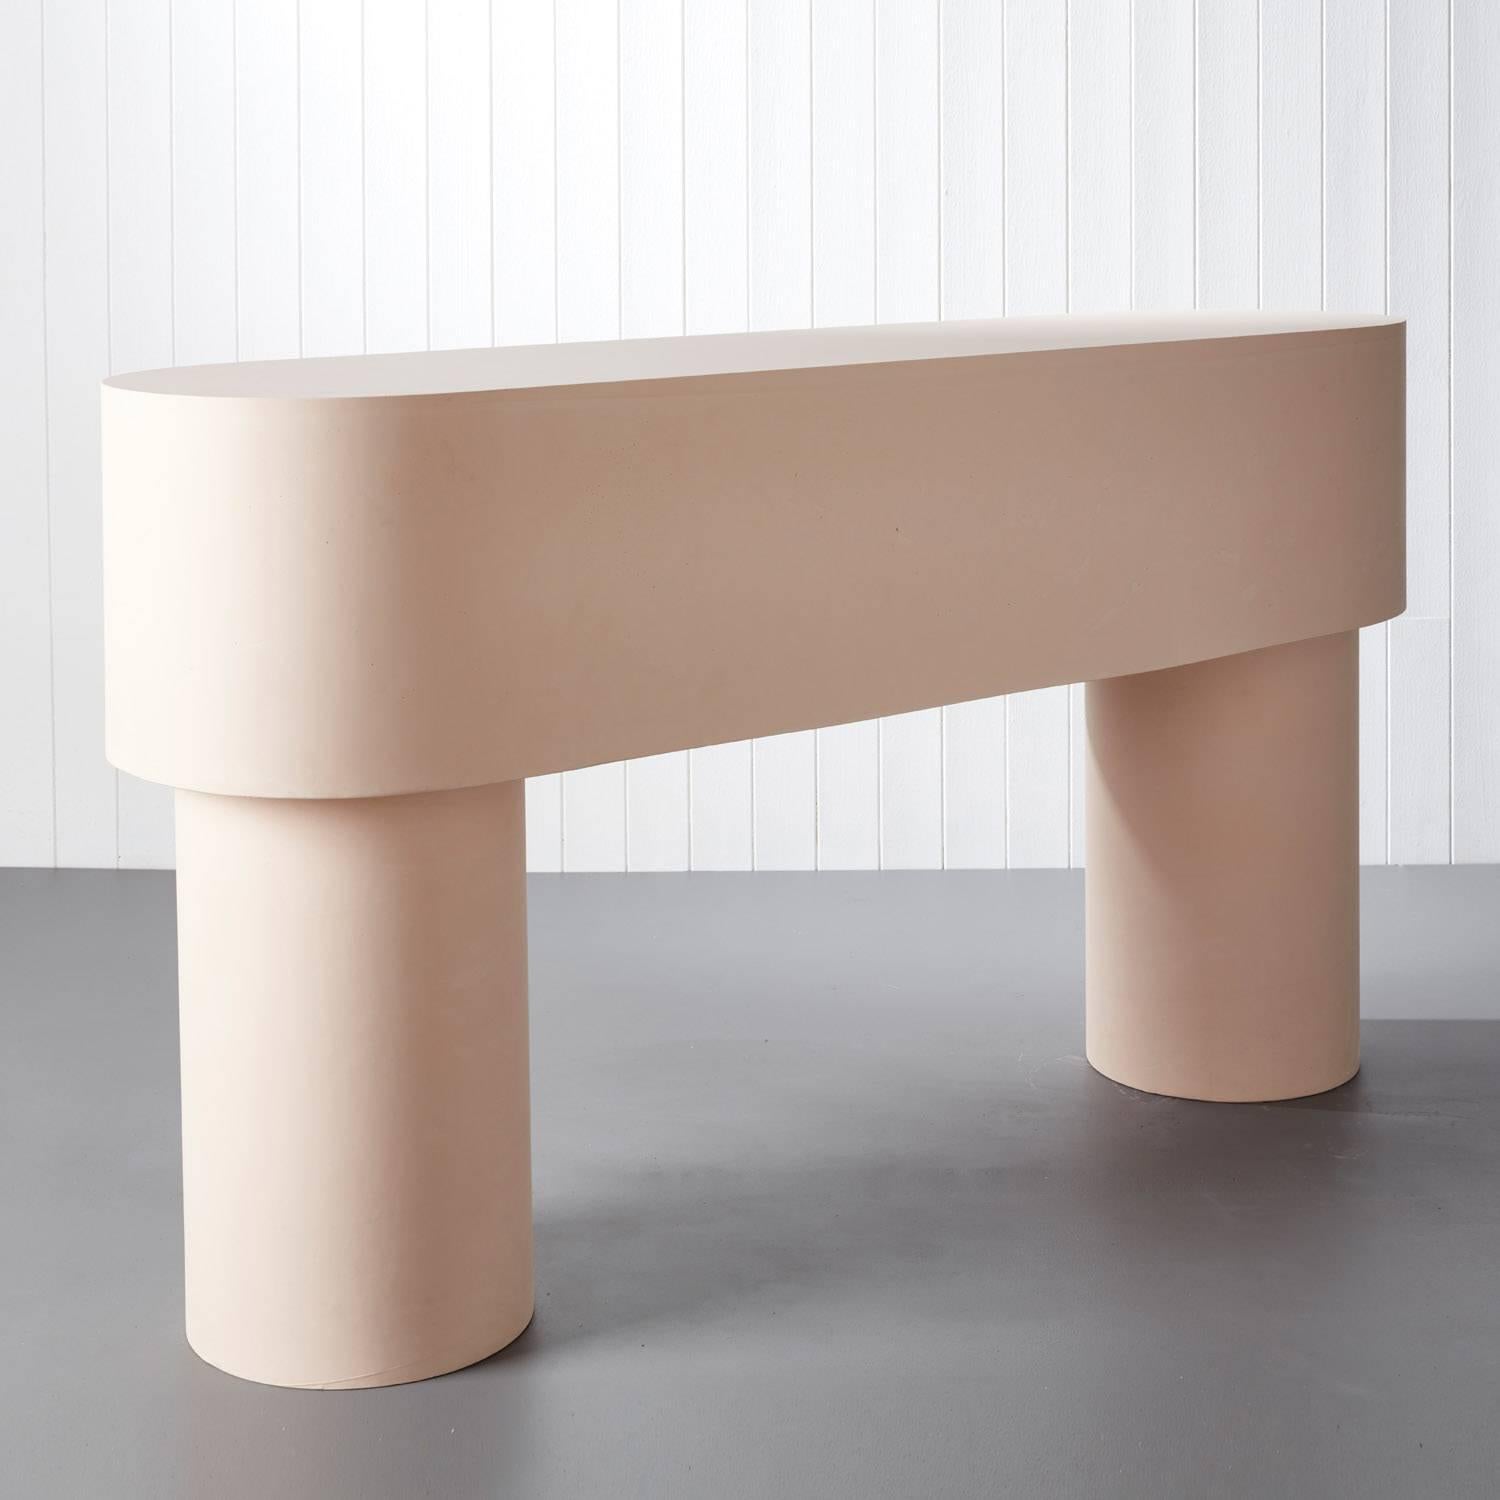 Pilotis console table by Malgorzata Bany, a light pink jesmonite console table with a smoothened surface and rounded corners. The structurally solid piece takes inspiration from the concept of pilotis- architectural support columns that